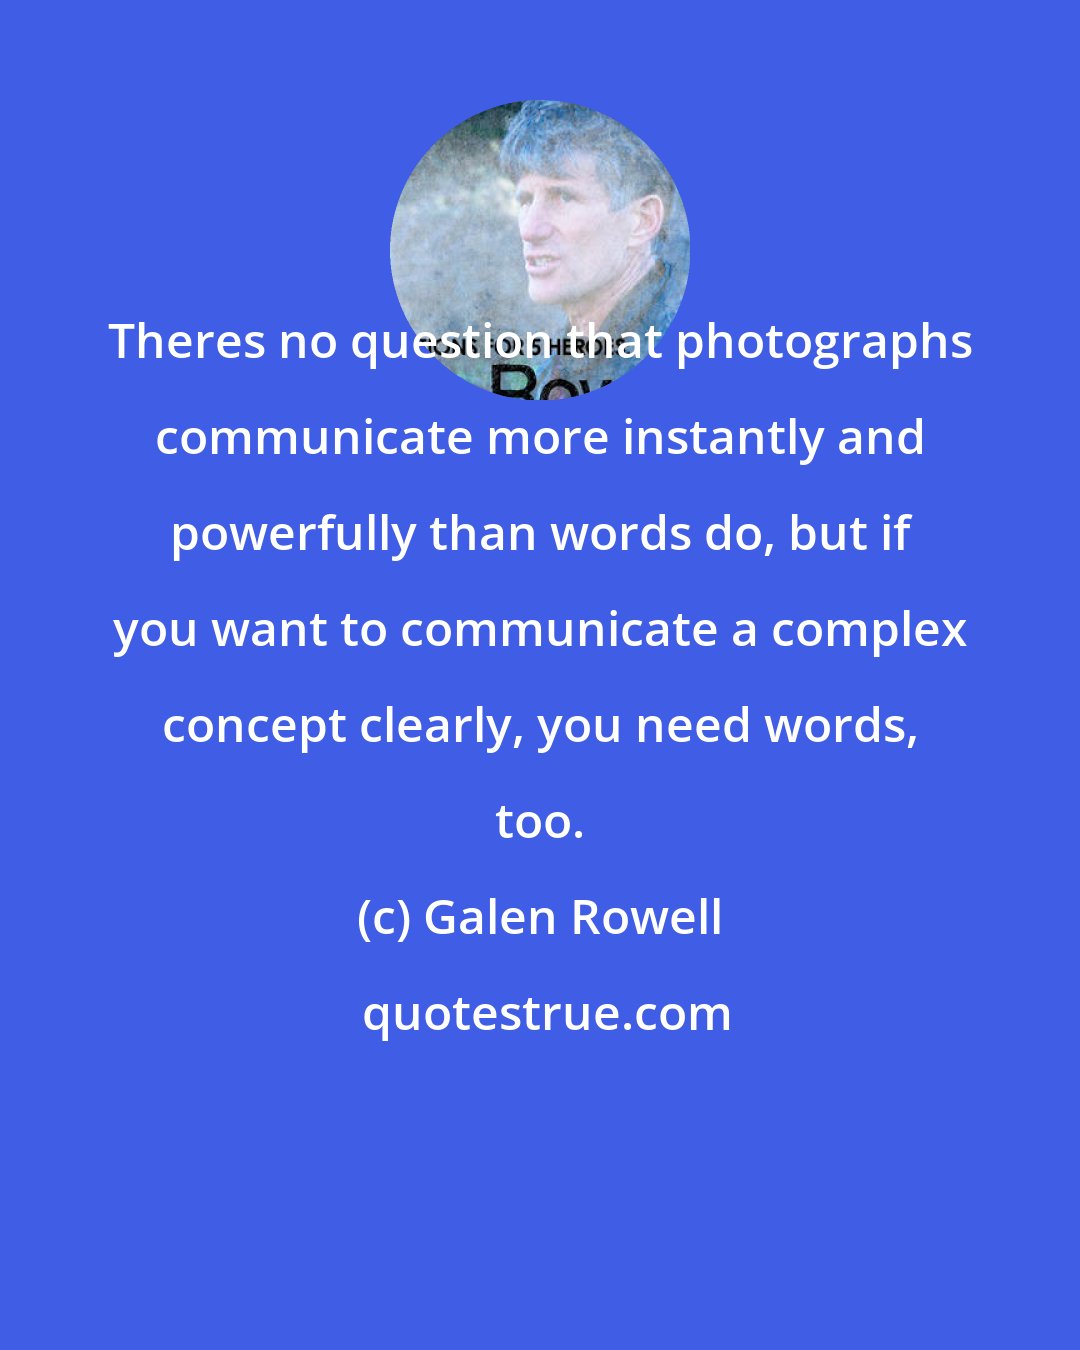 Galen Rowell: Theres no question that photographs communicate more instantly and powerfully than words do, but if you want to communicate a complex concept clearly, you need words, too.